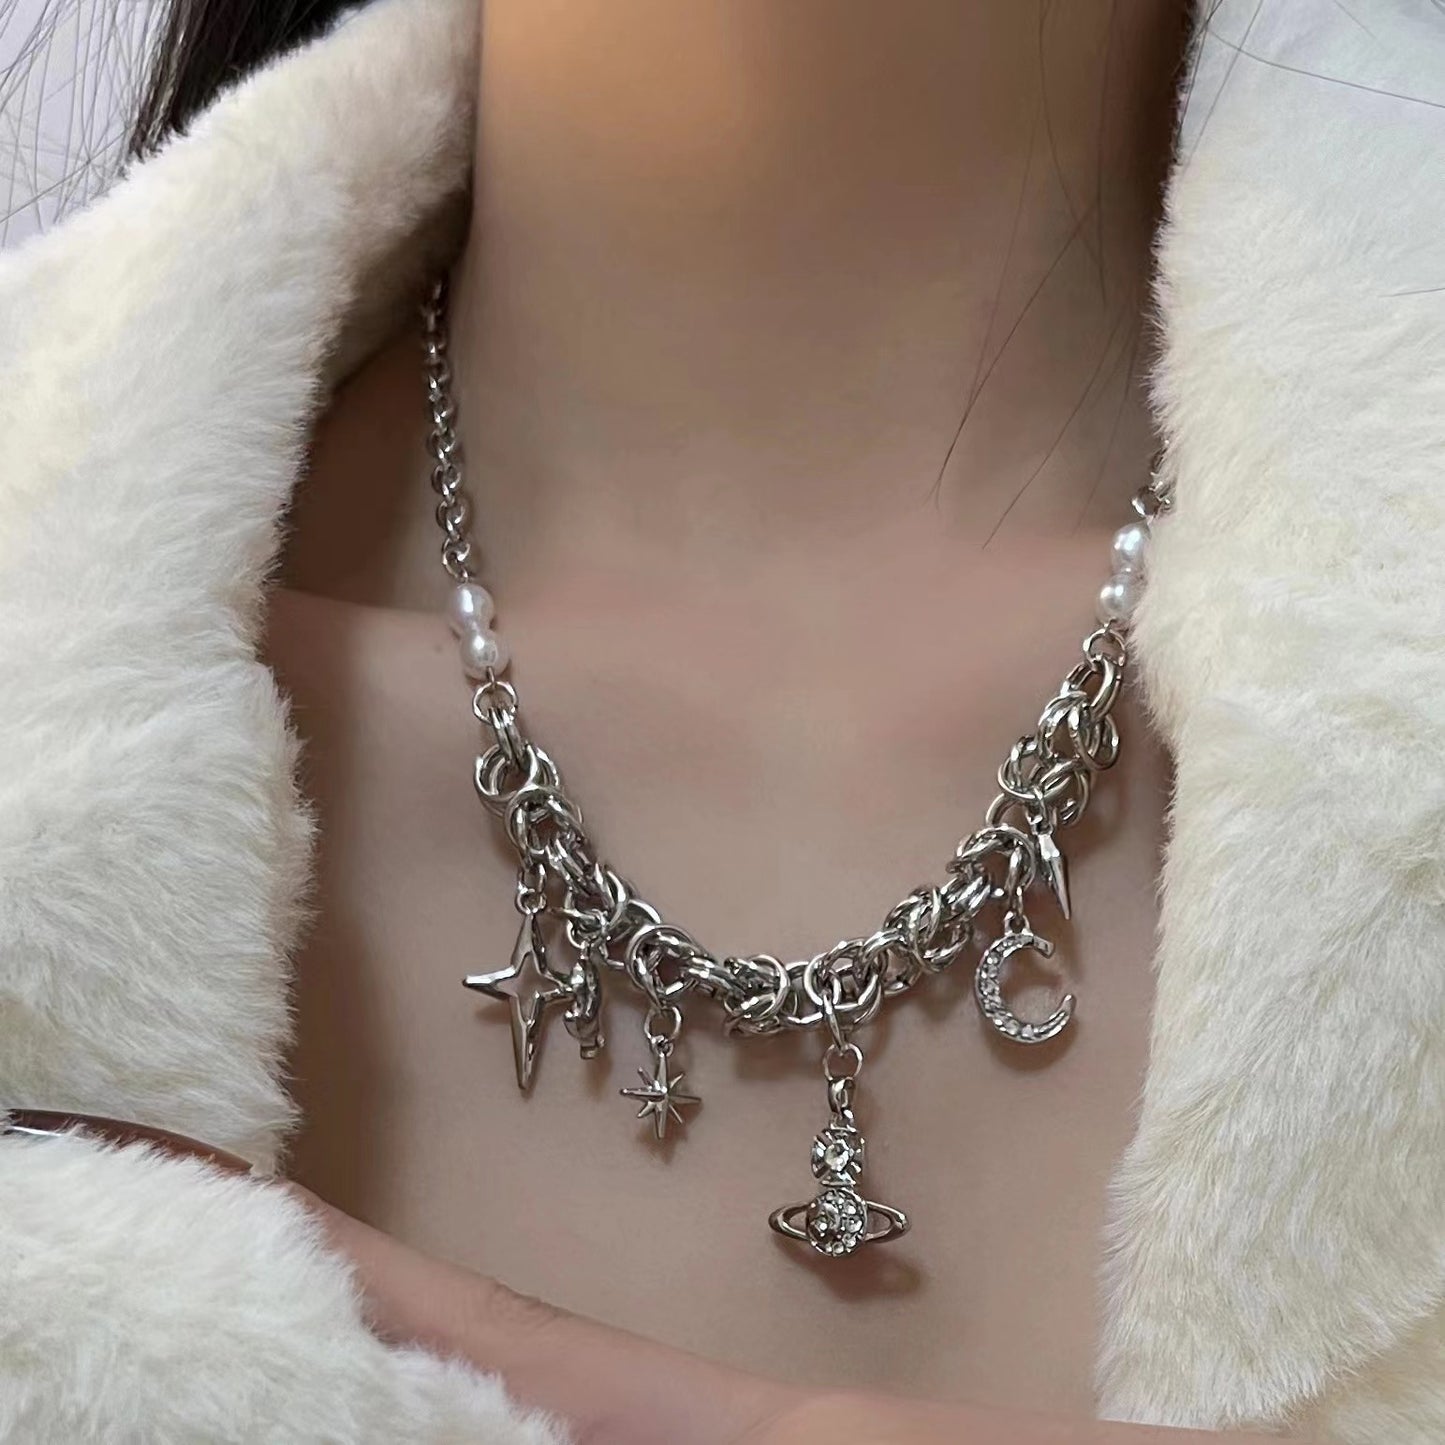 High grade Spicy Girl Street Shoot Necklace Saturn Cross Collar Chain Metal Neckchain Small Neutral Cool Style Jewelry